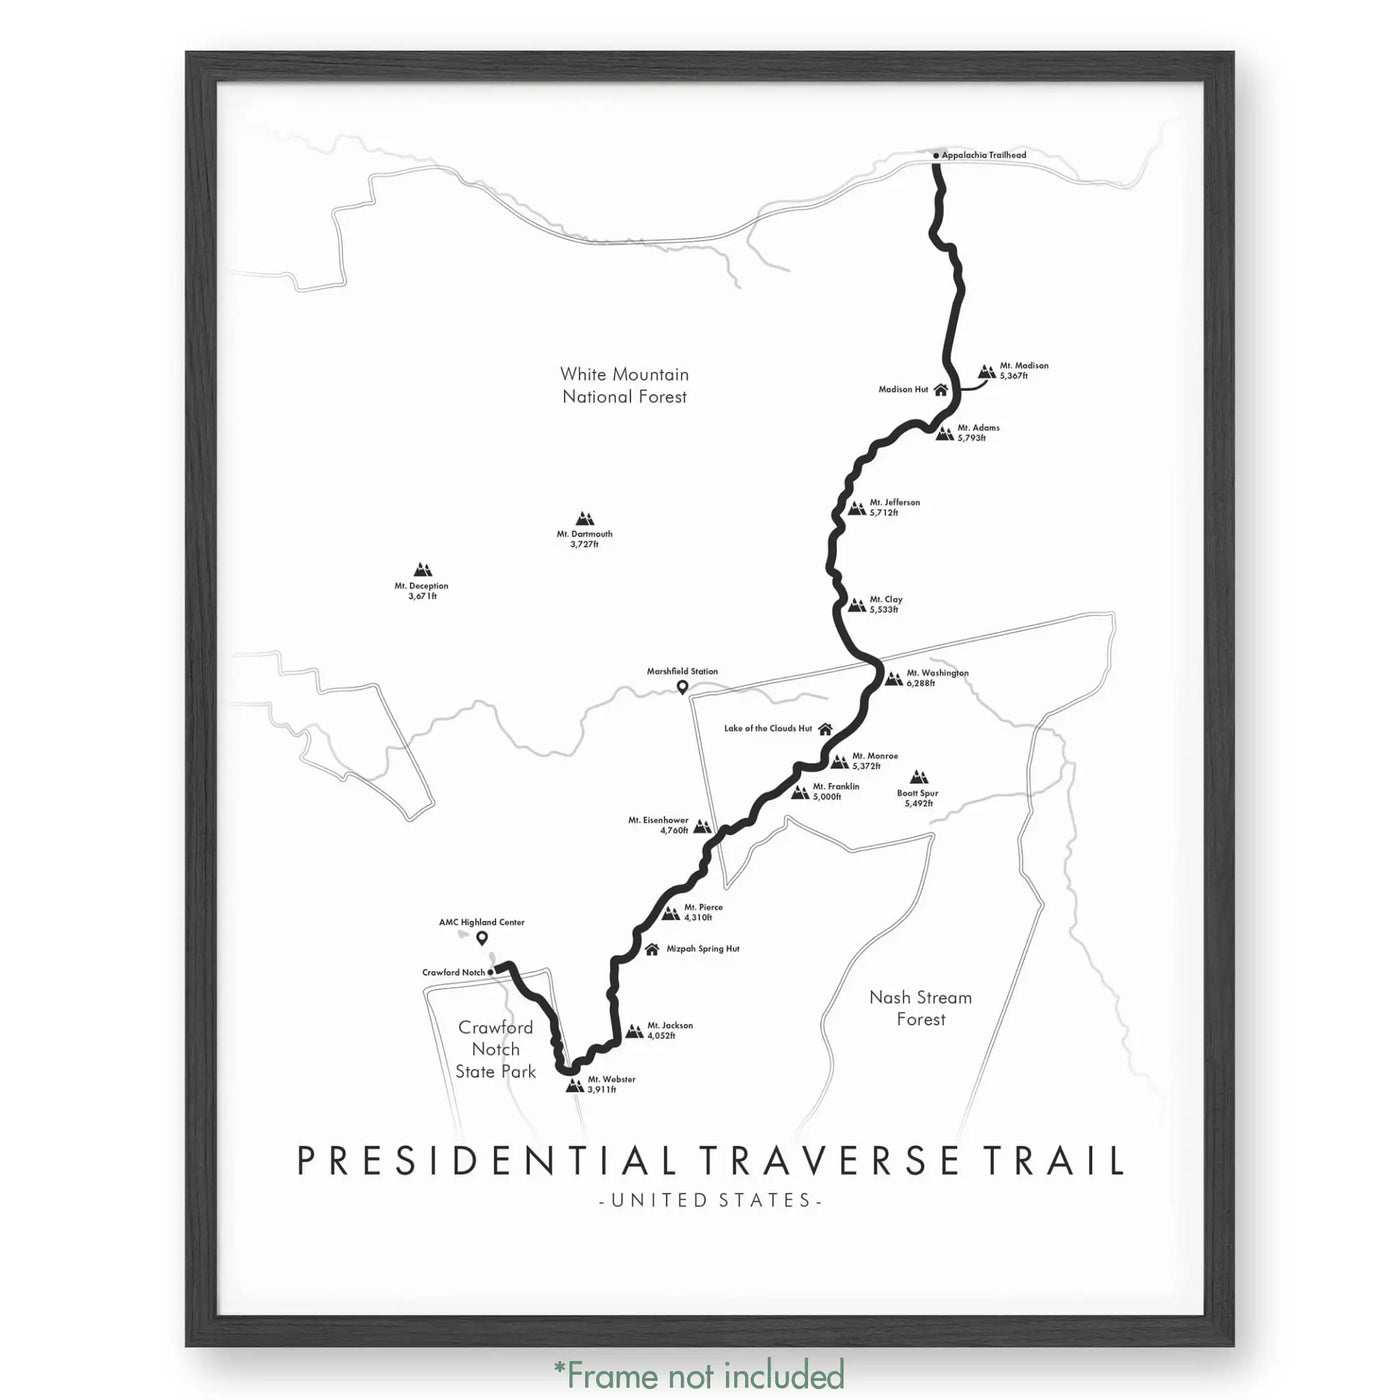 Trail Poster of Presidential Traverse Trail - White